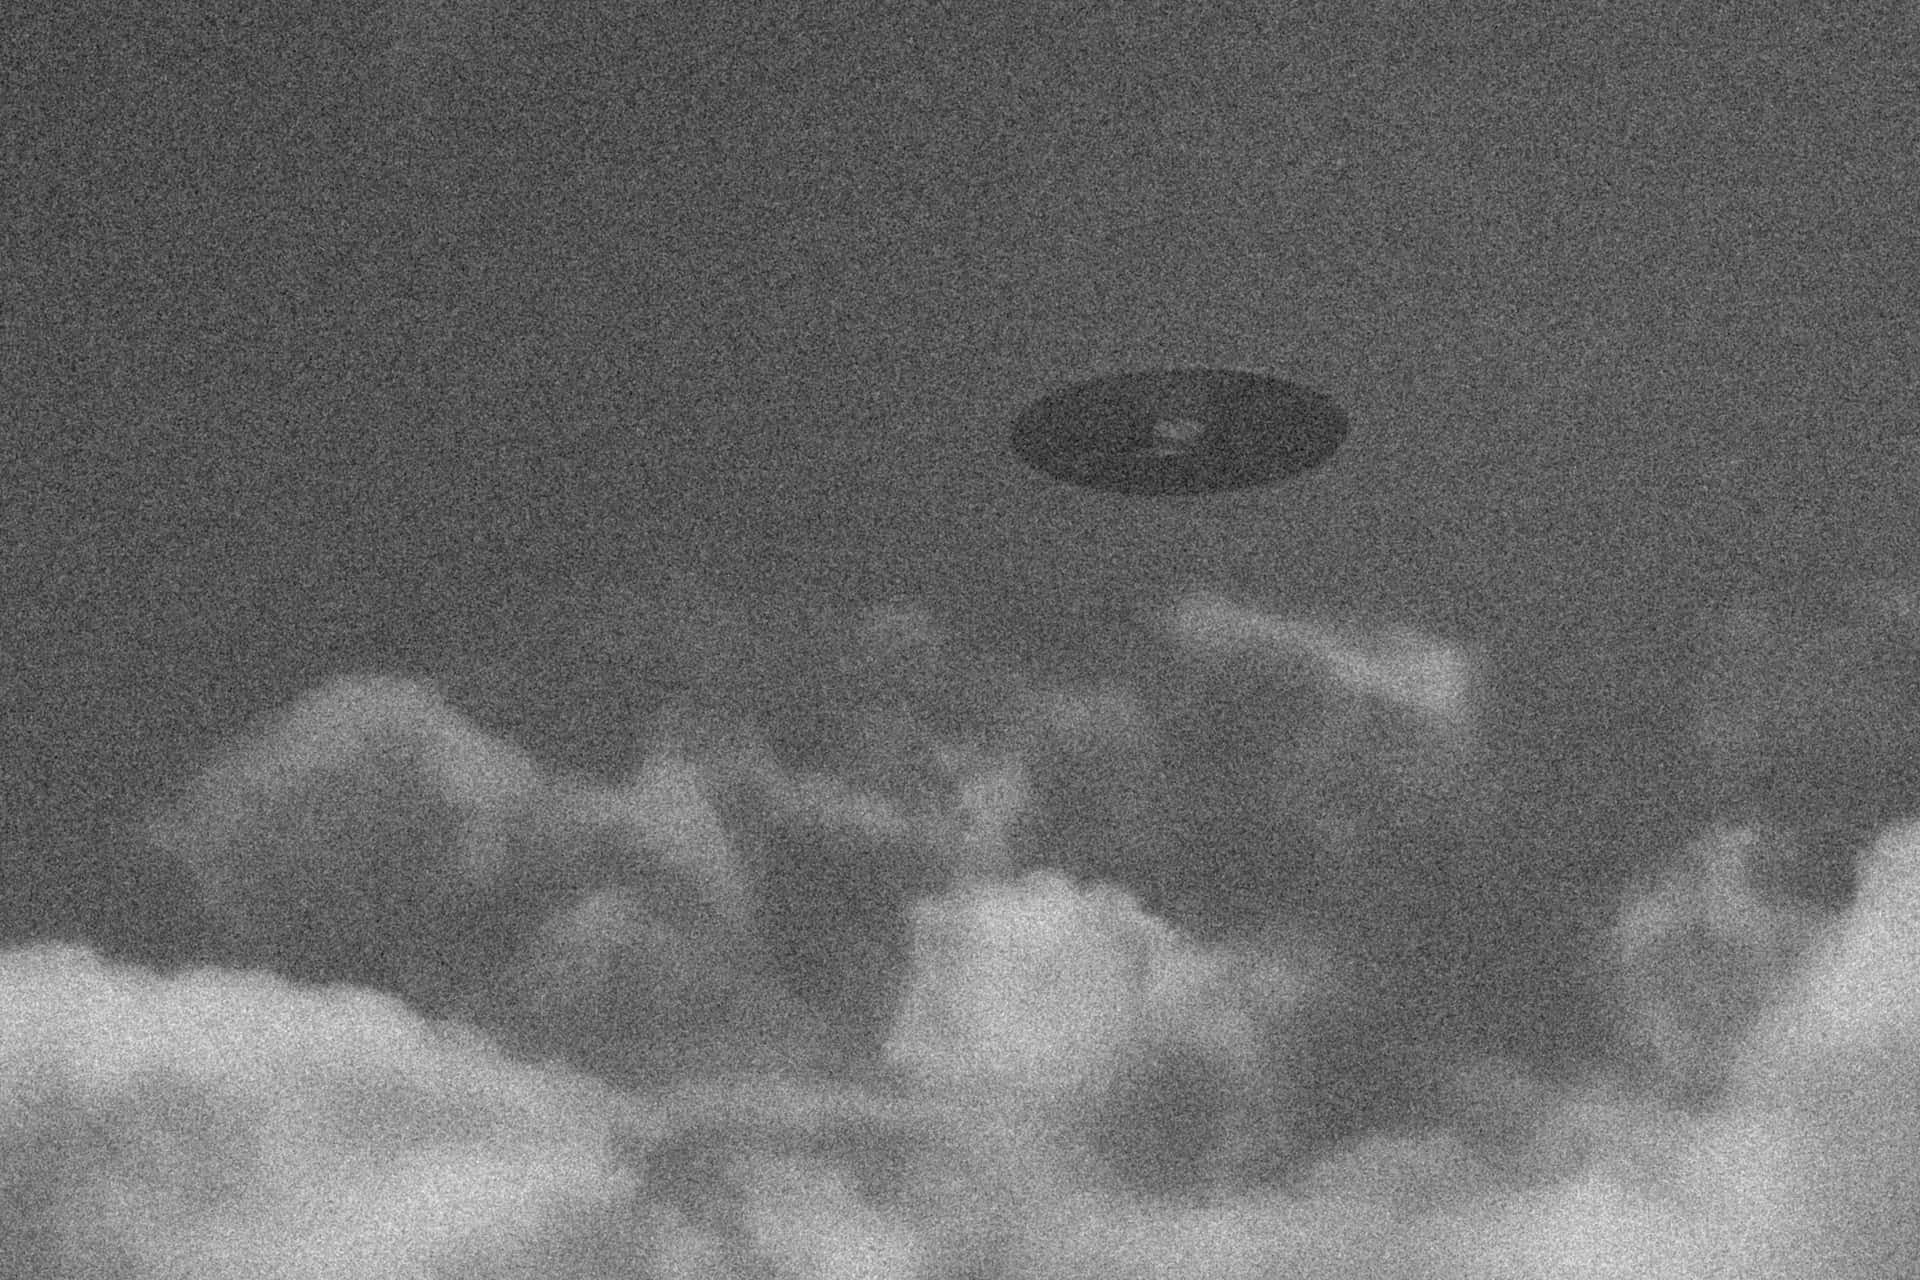 Mysterious Unidentified Flying Object